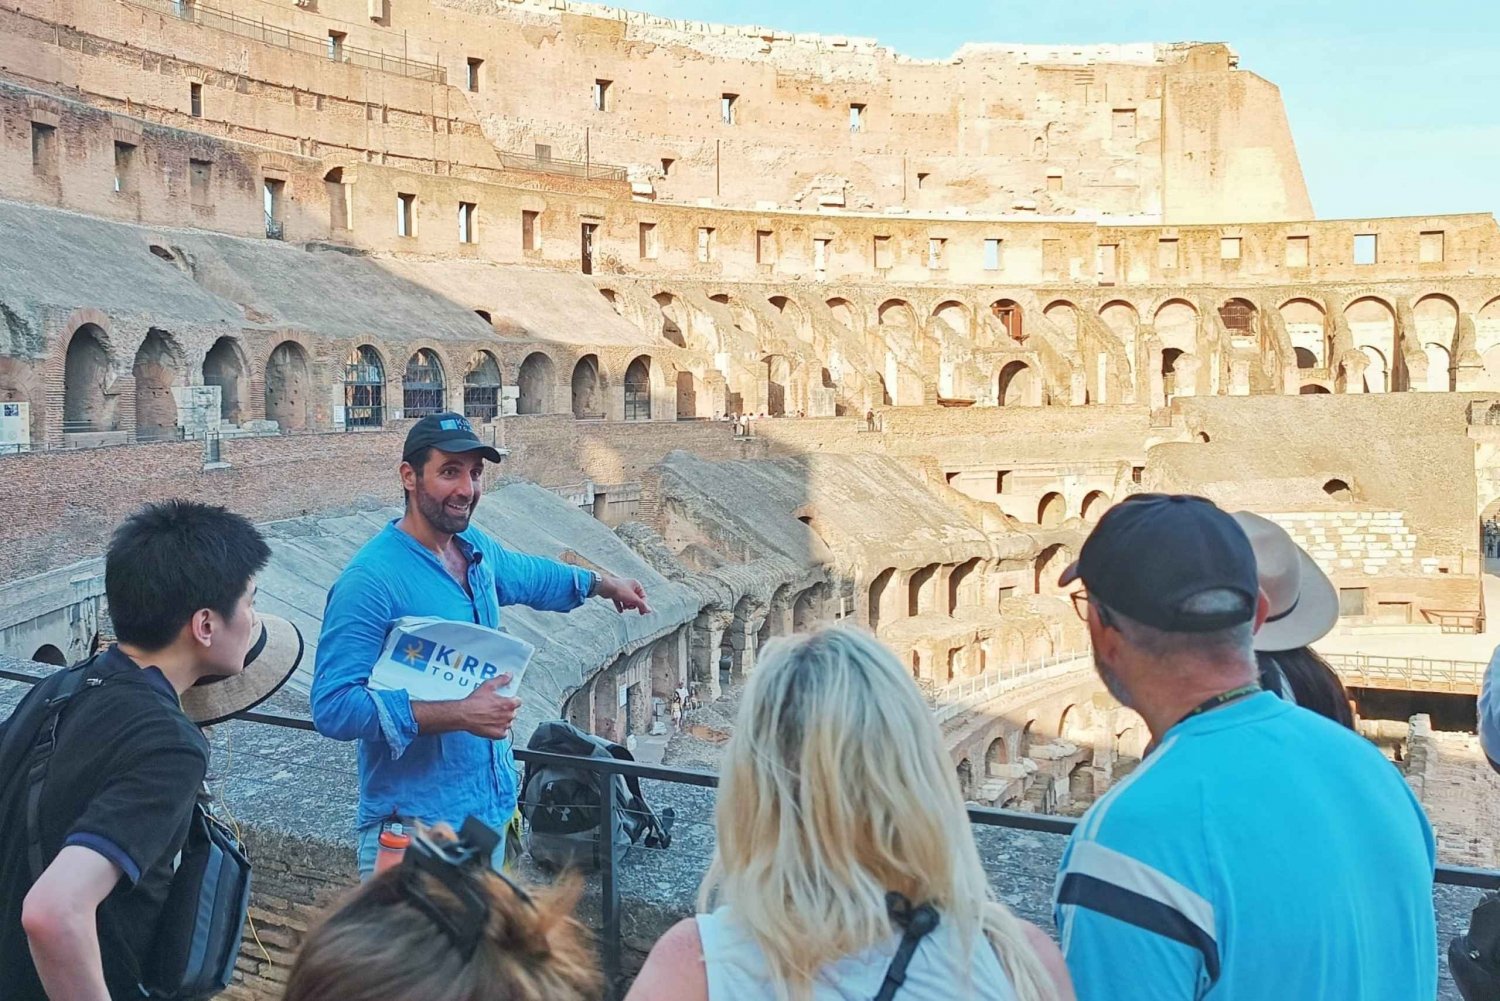 Rome: The Colosseum and Gladiator Chronicles Guided Tour